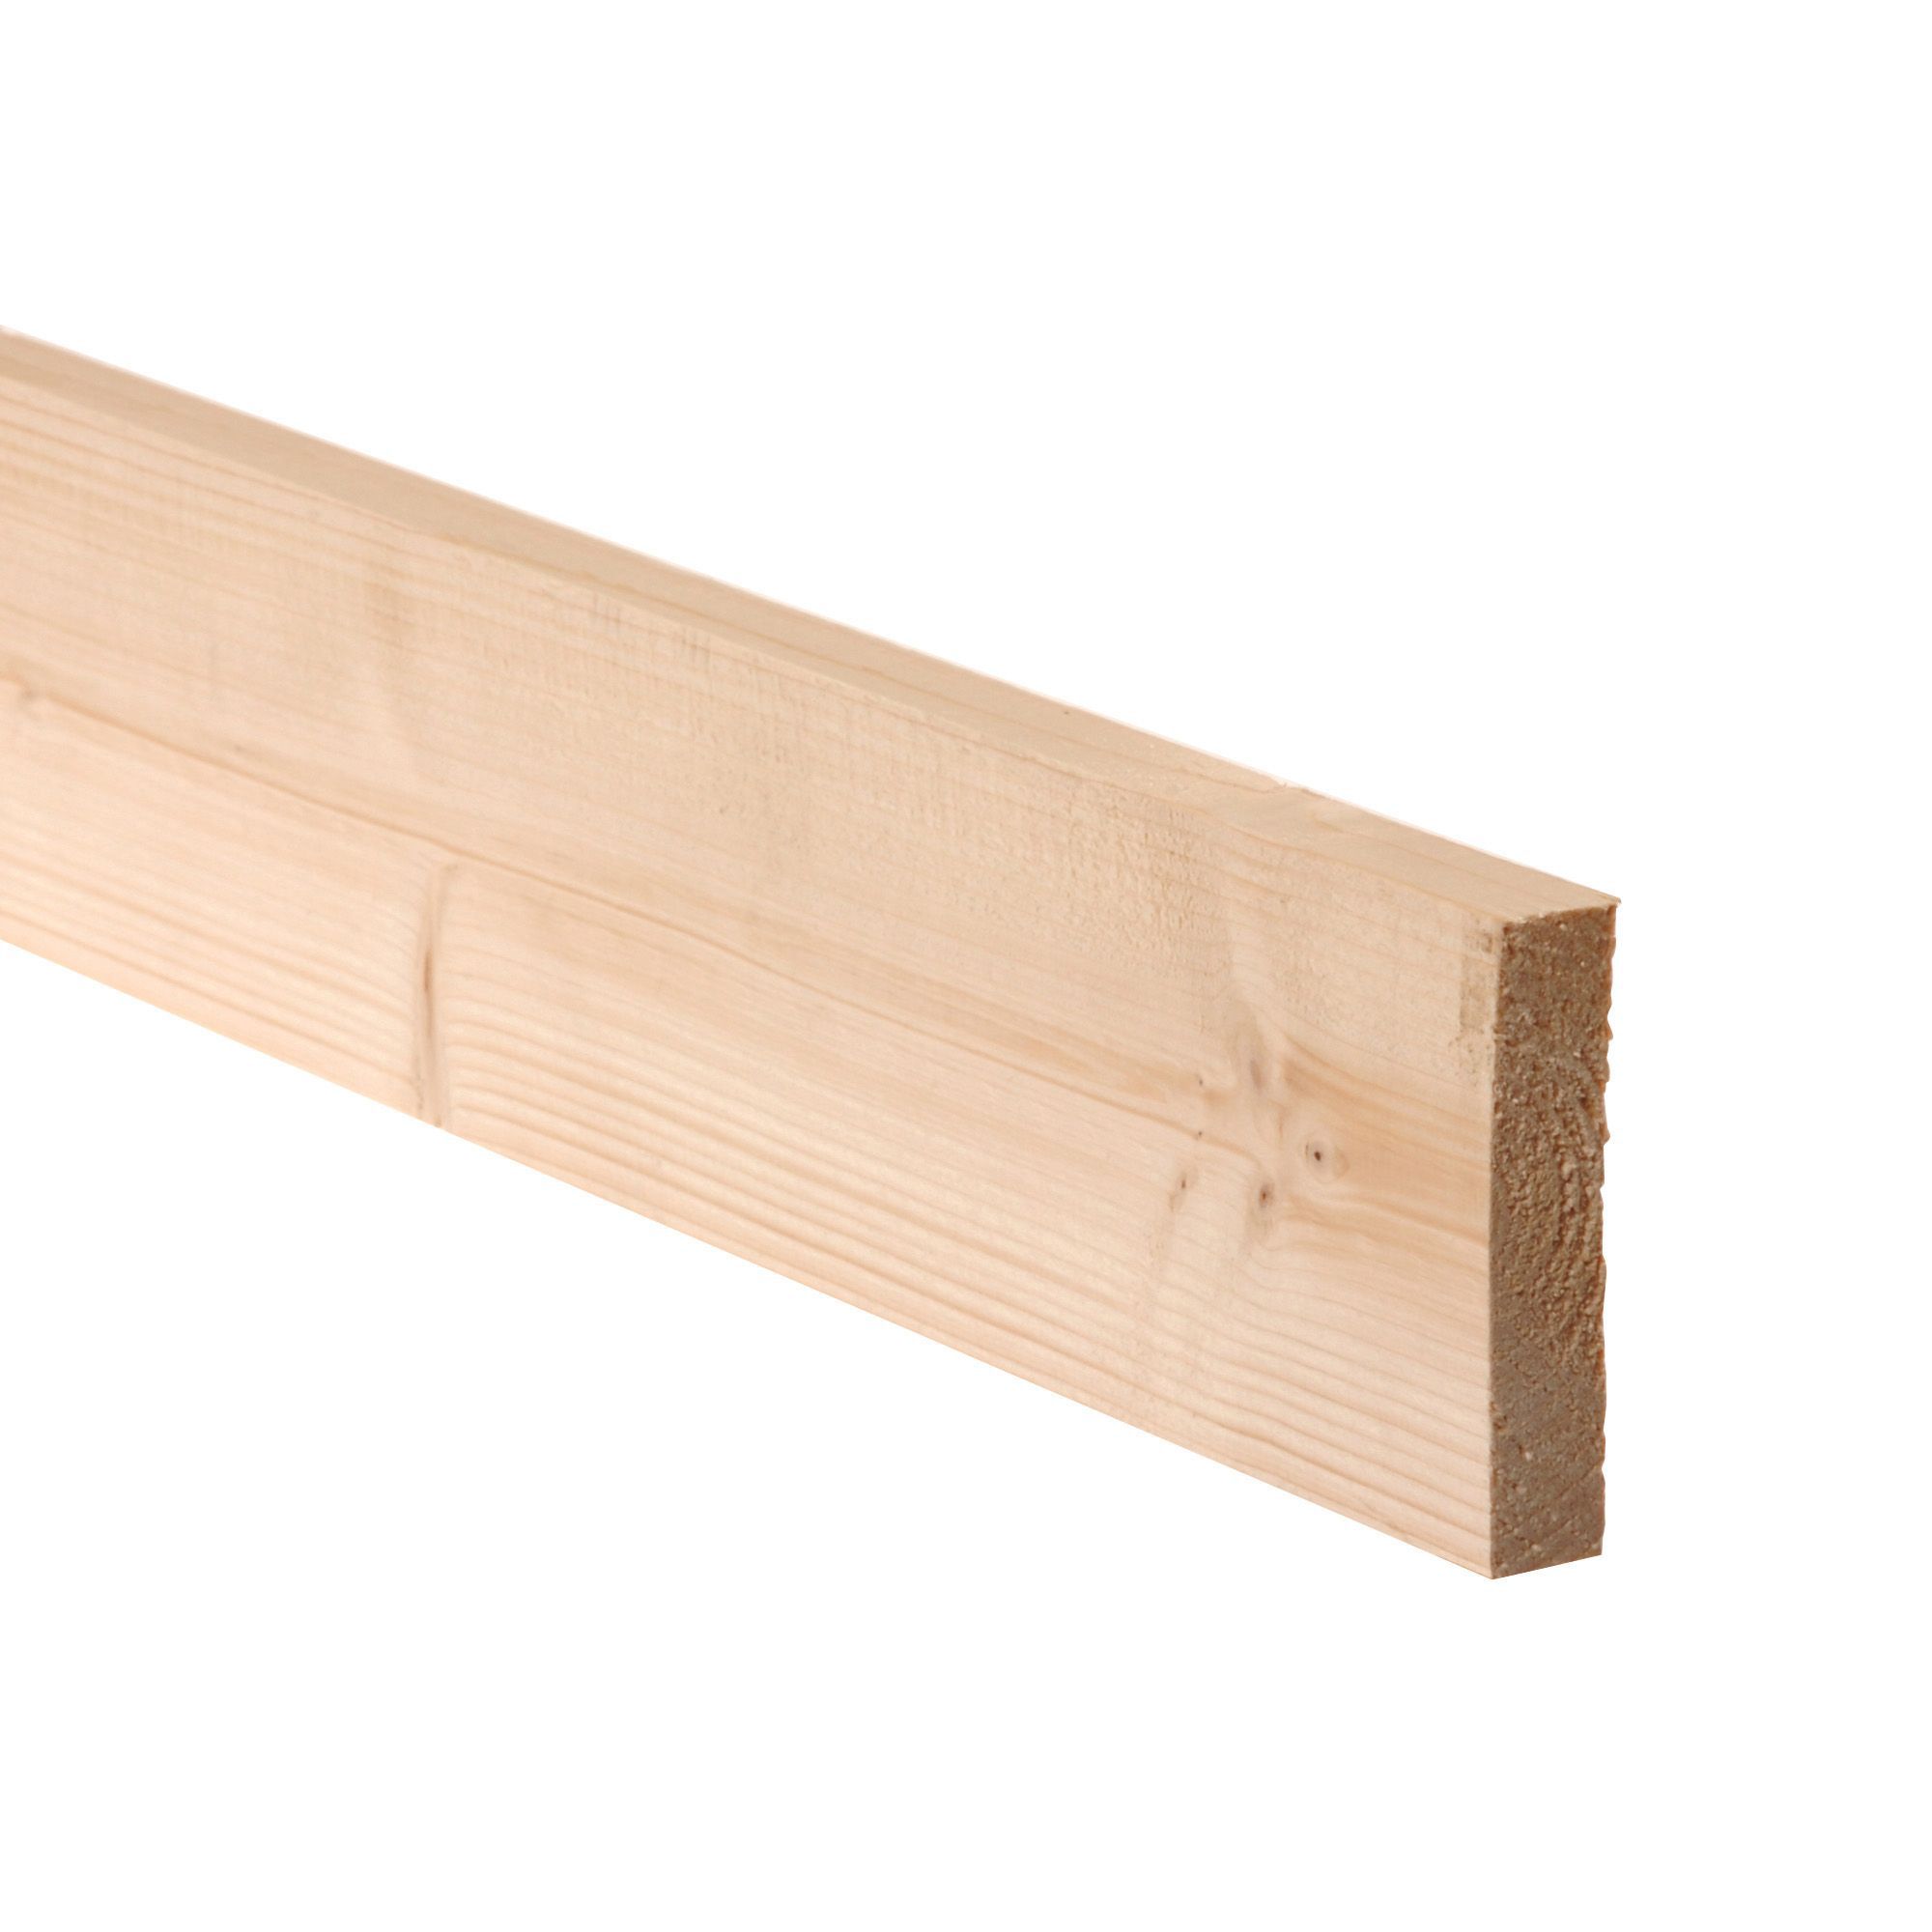 Smooth Planed Square edge Stick timber (L)1.8m (W)70mm (T)18mm, Pack of 12